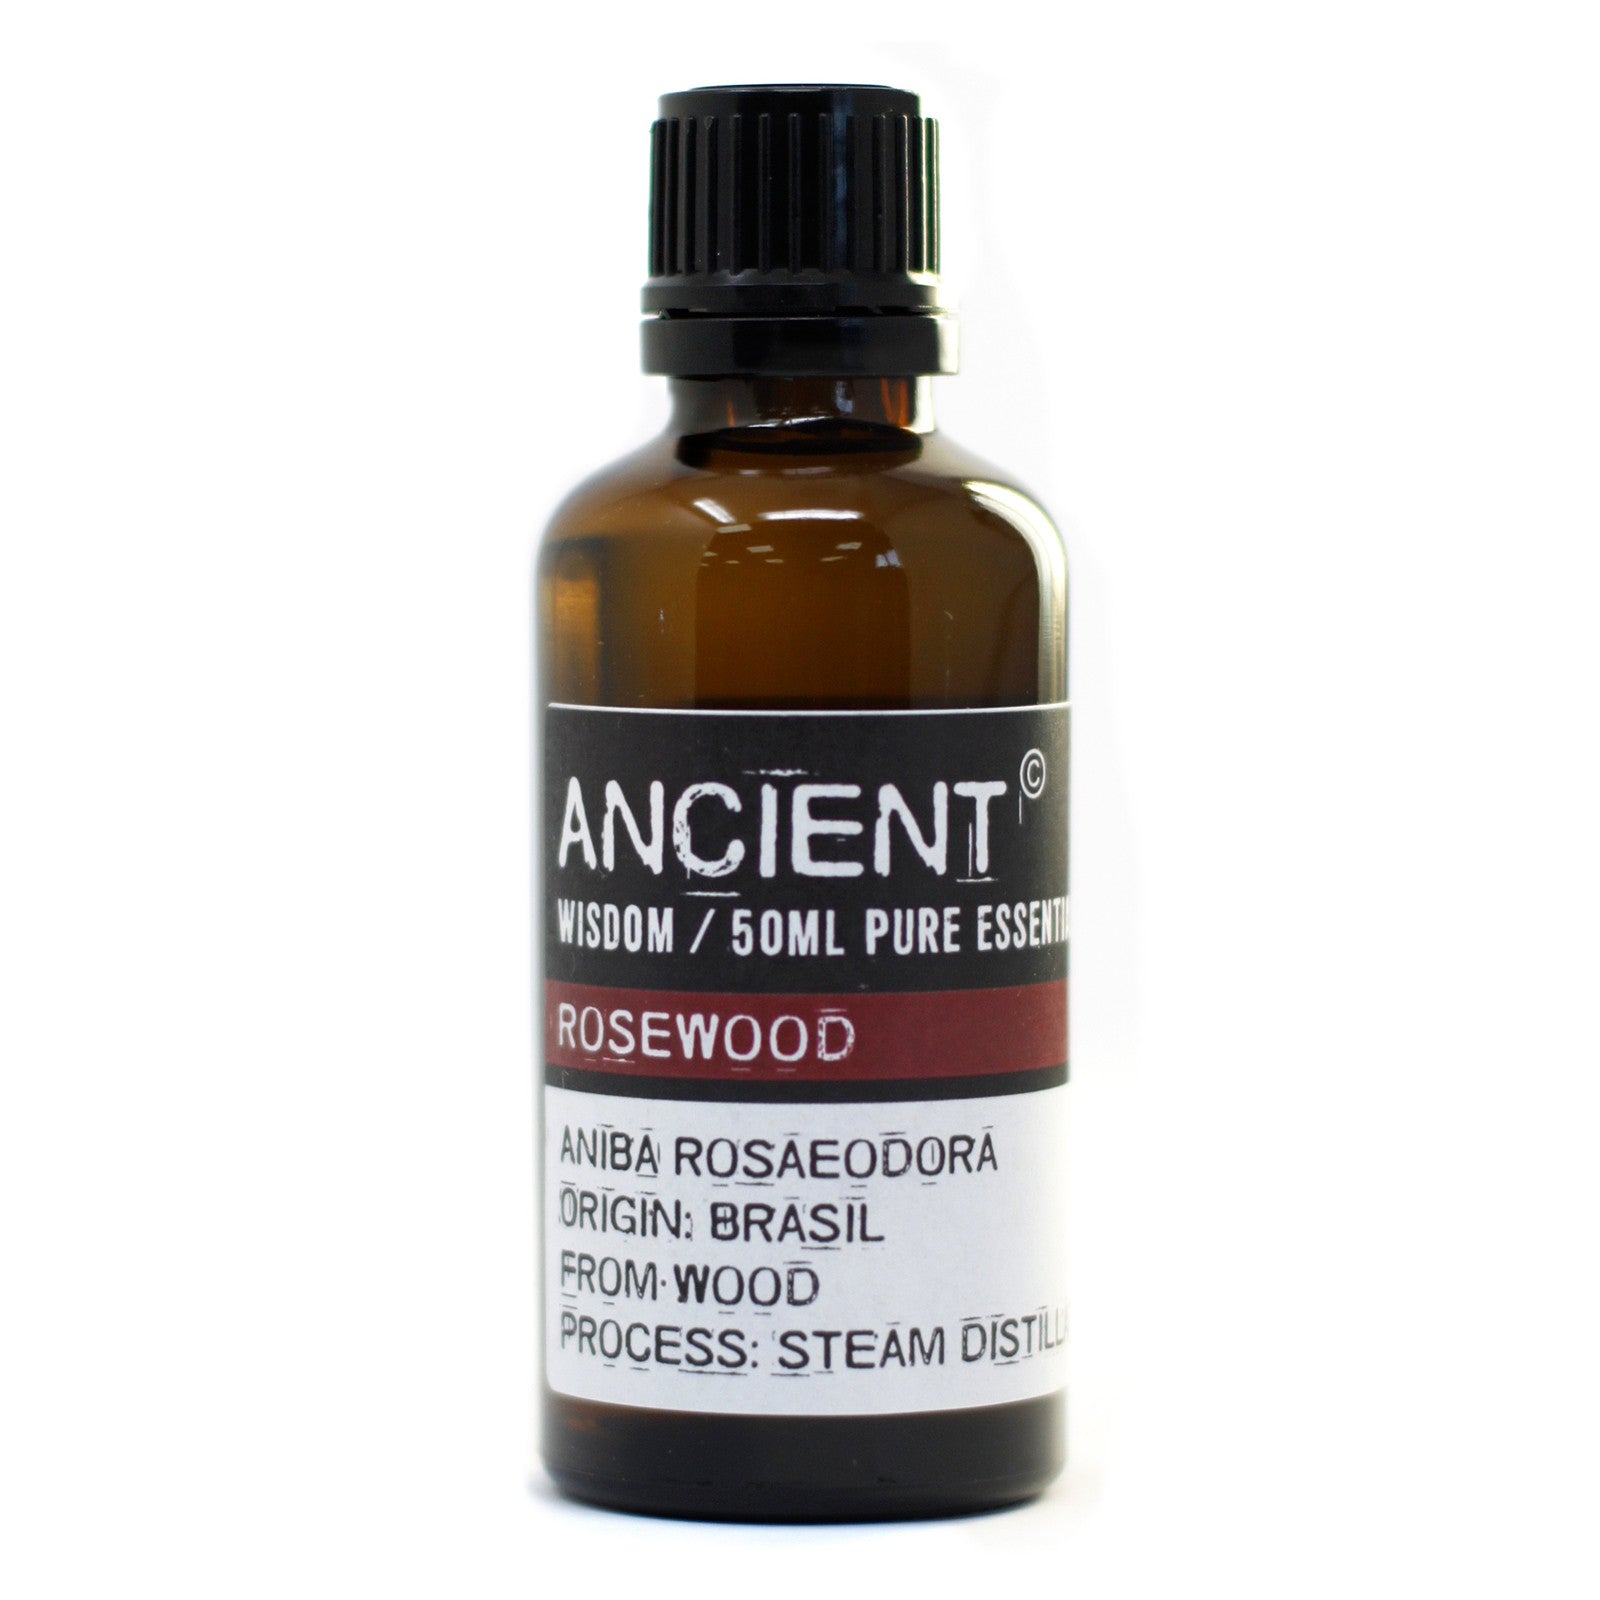 View Rosewood 50ml information